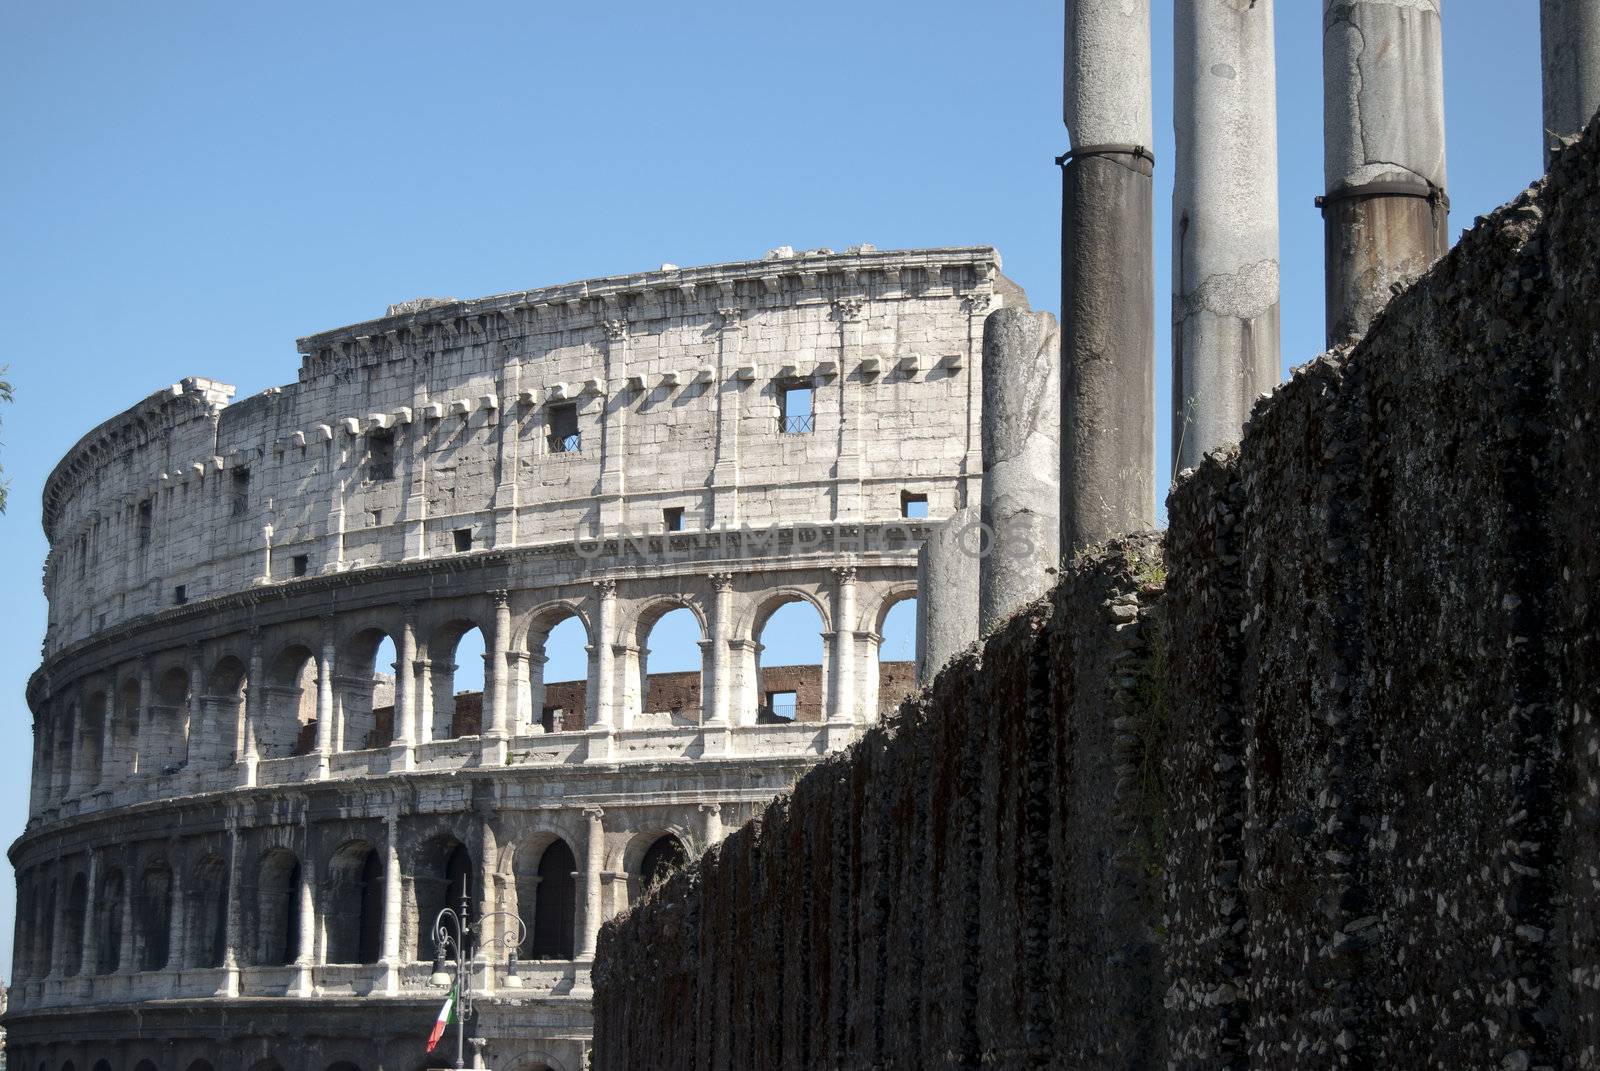 Rome. The Colosseum, the symbol monument of the city